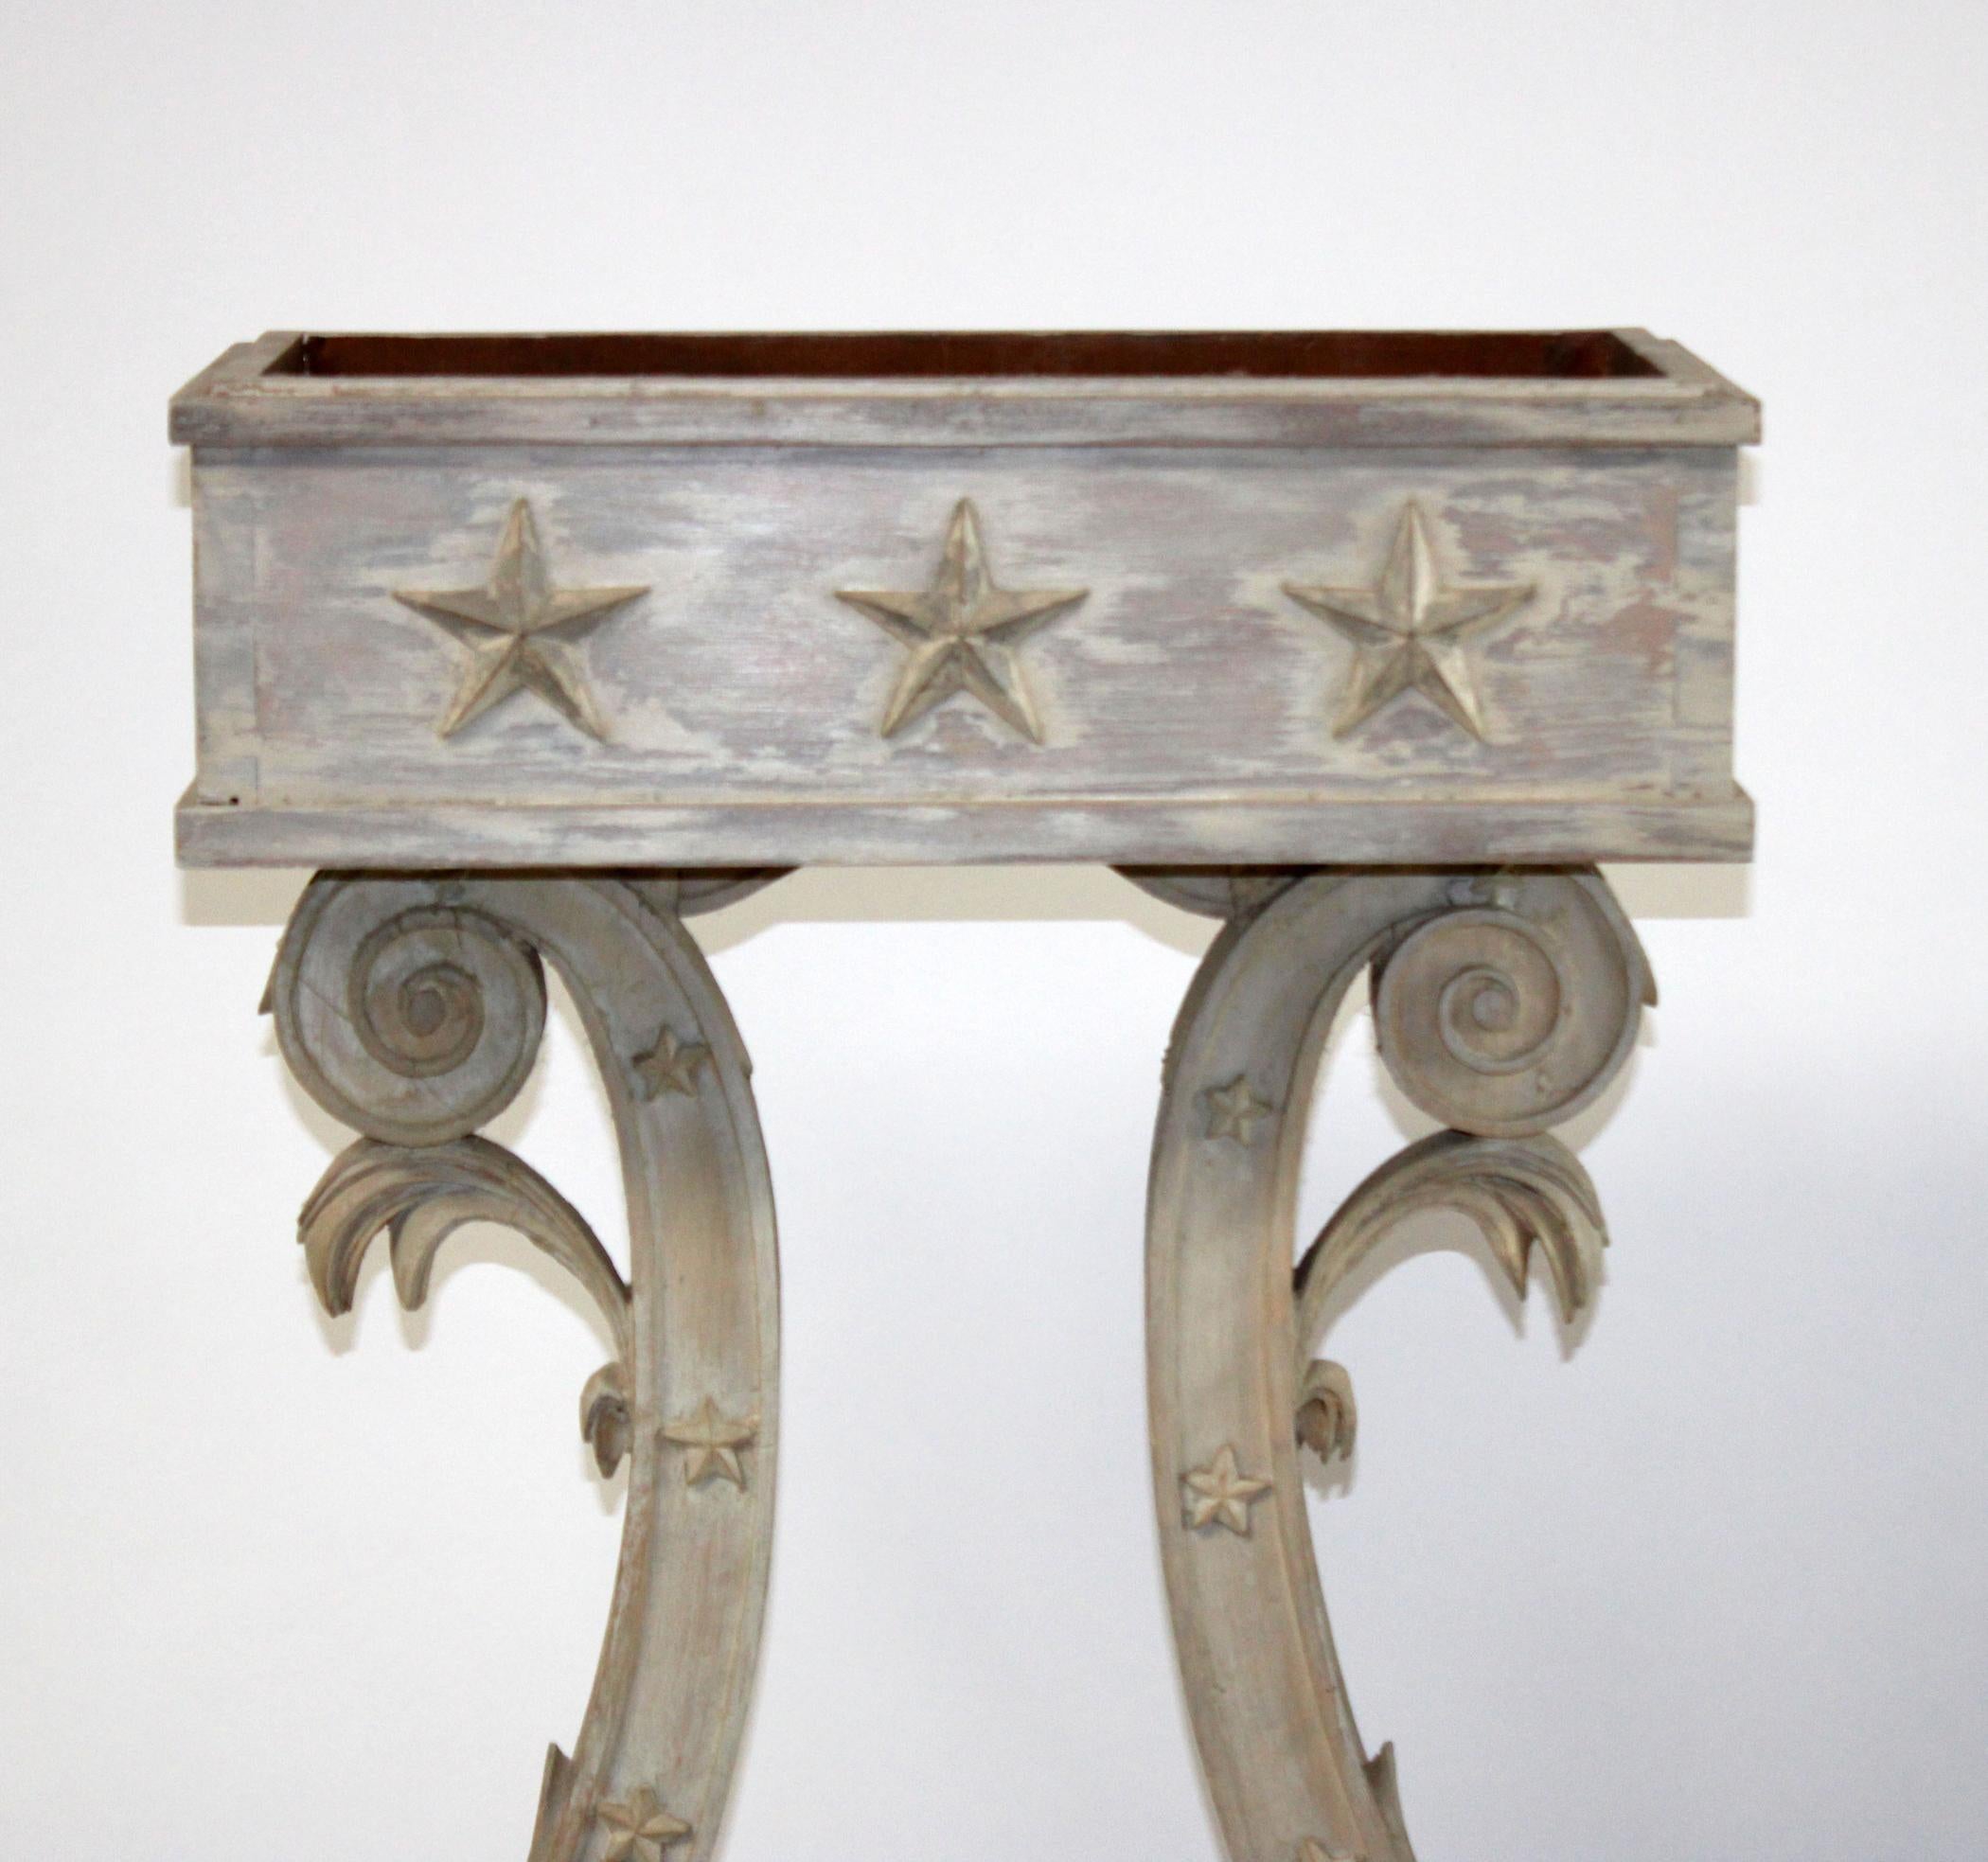 Gustavian style painted and distressed Lyre form planter. In the neoclassical taste. Wonderfully dovetailed and distressed. Quite charming.